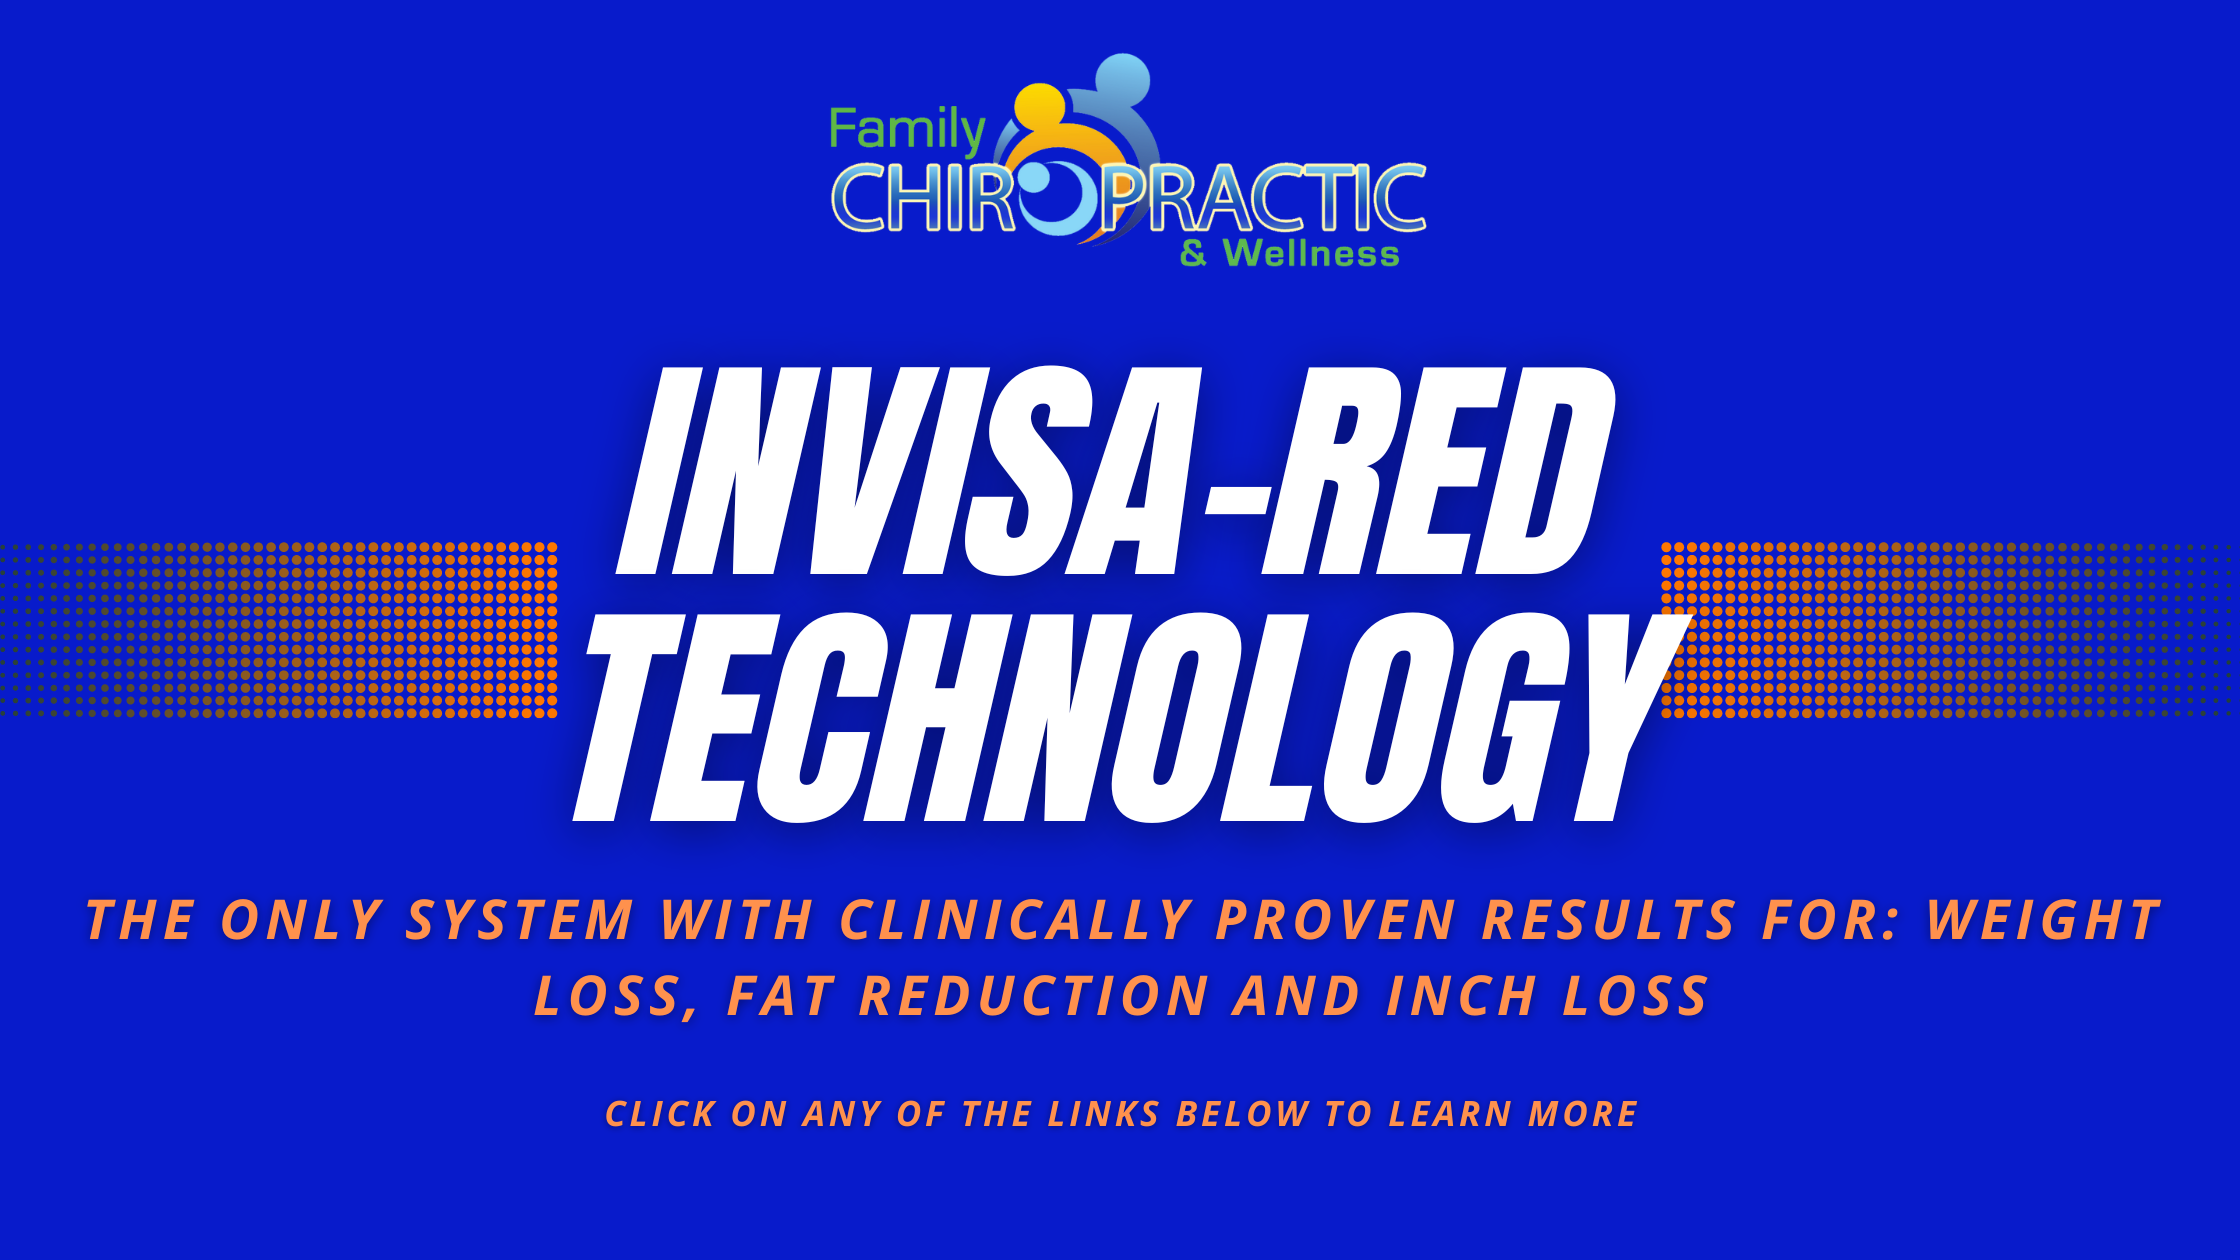 Invisa-Red Technology